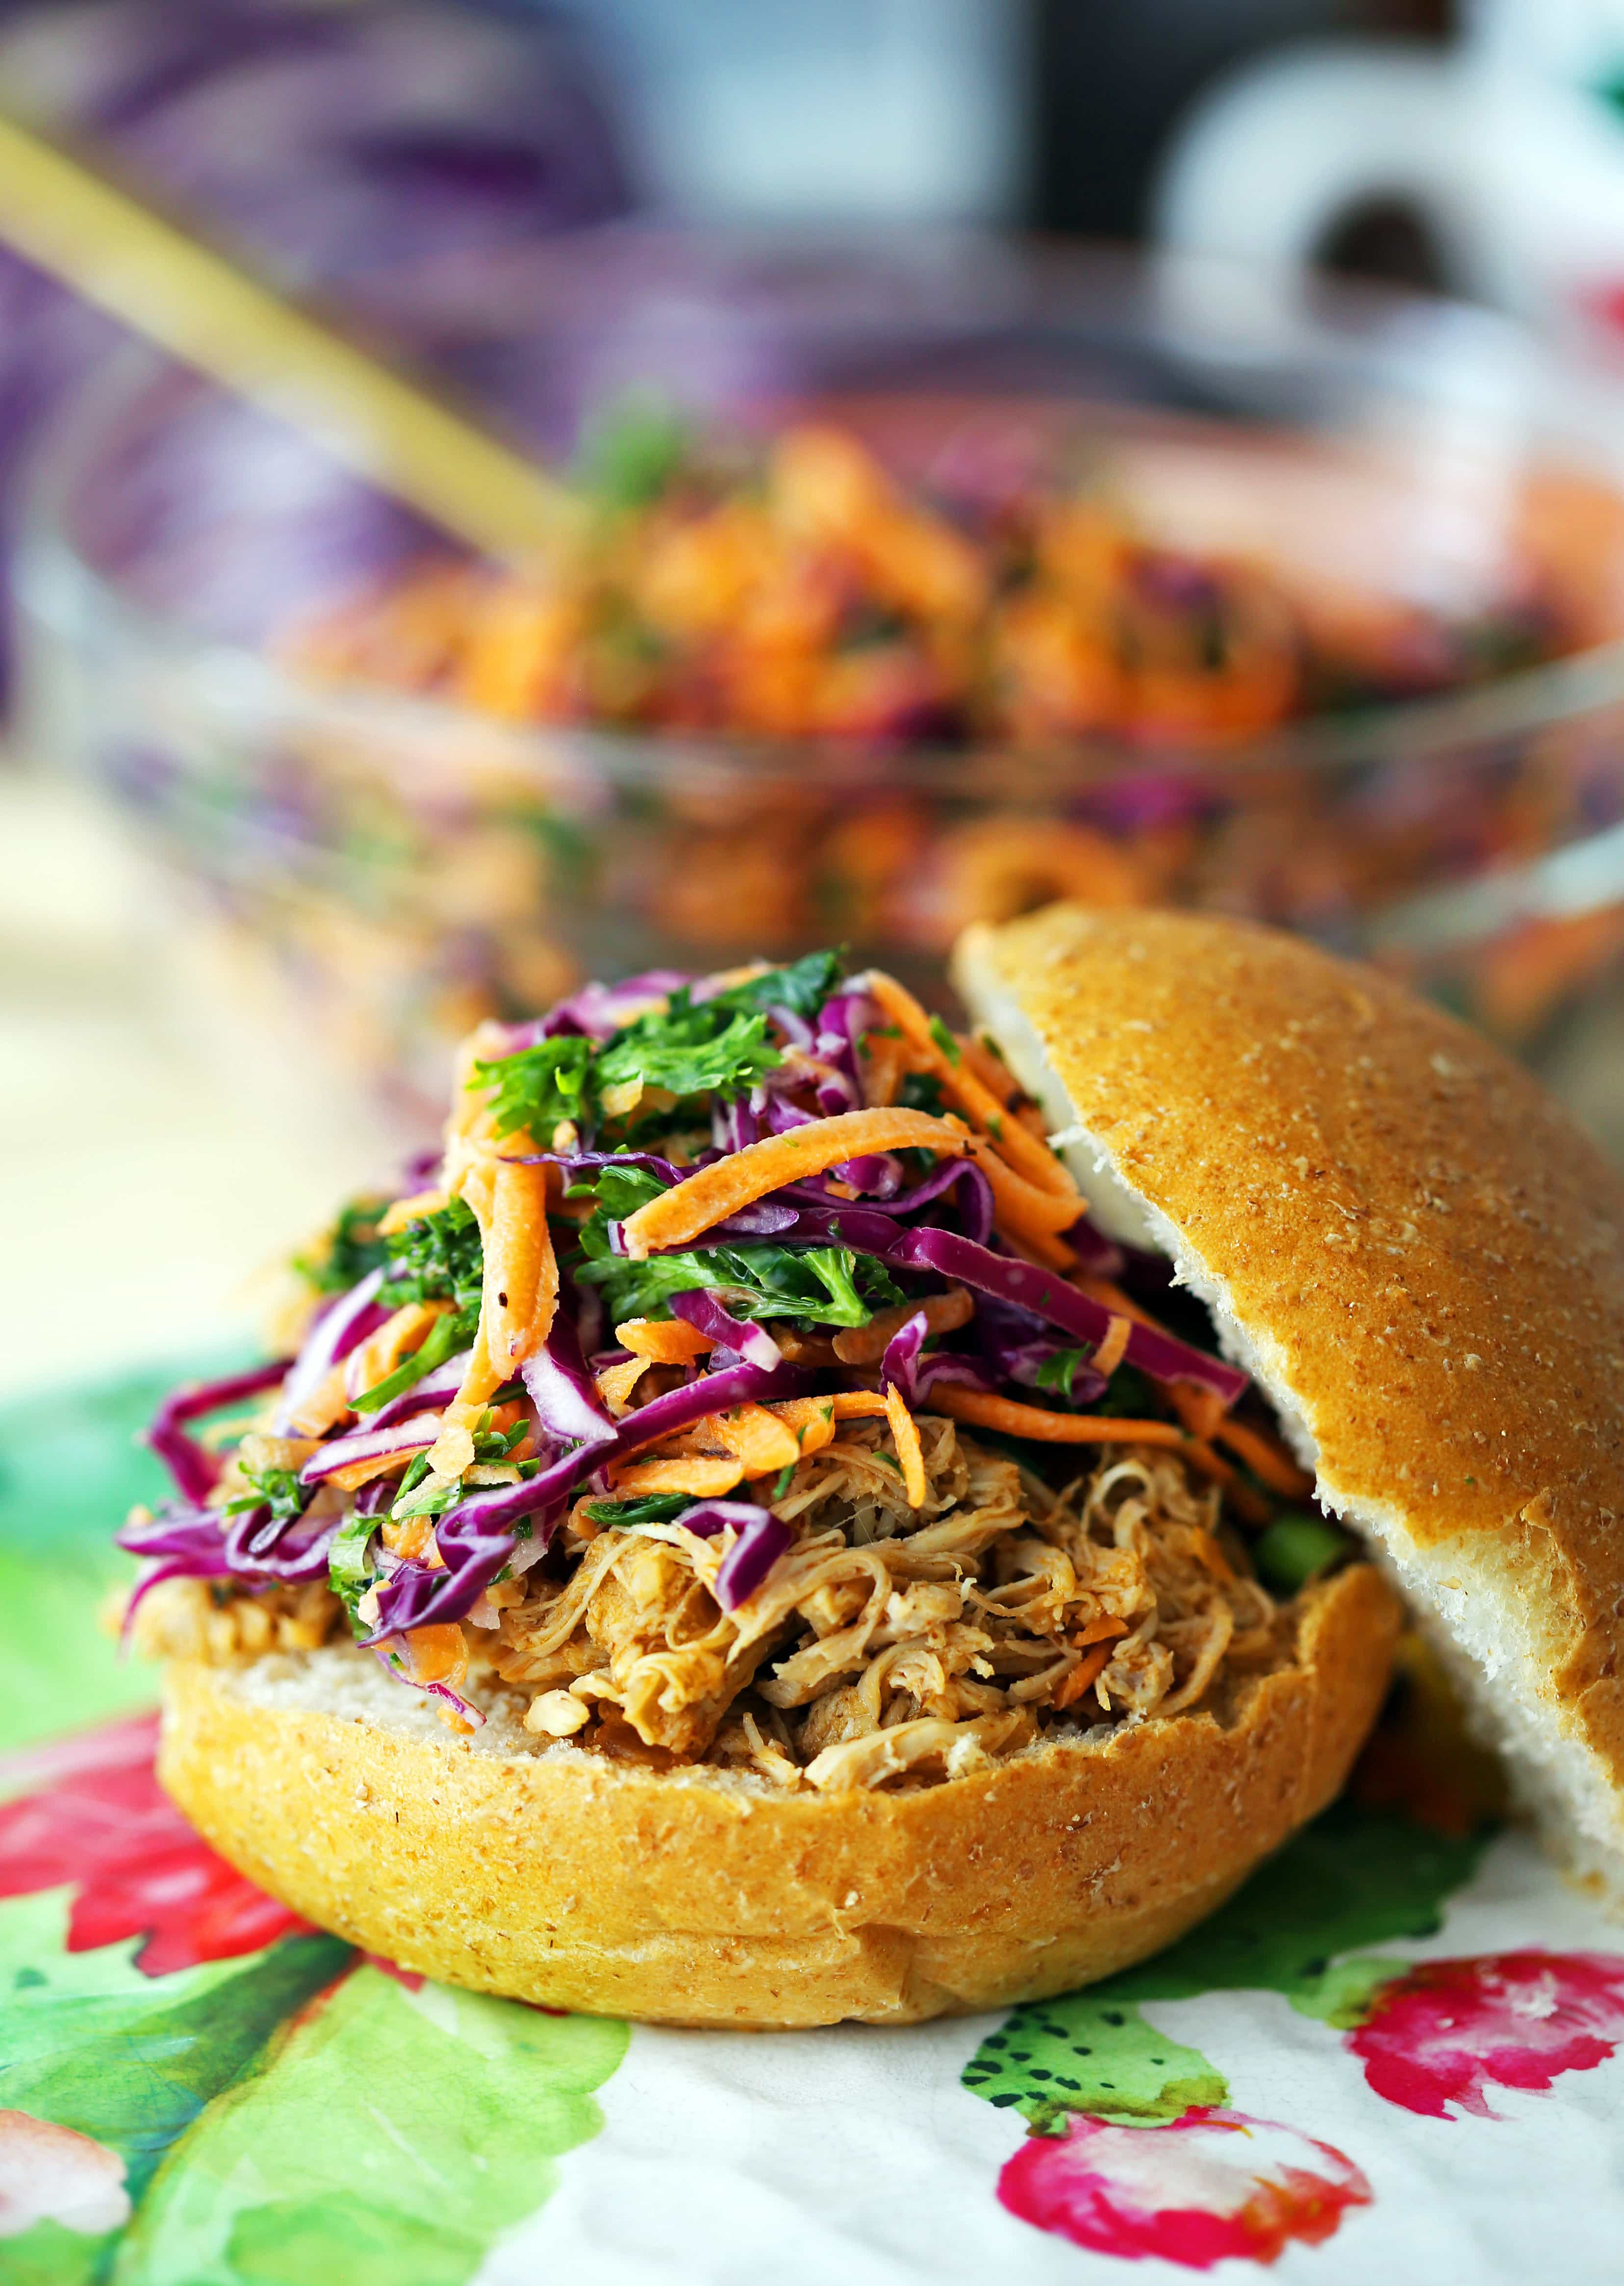 A bun with shredded barbecue chicken and carrot cabbage coleslaw on top.